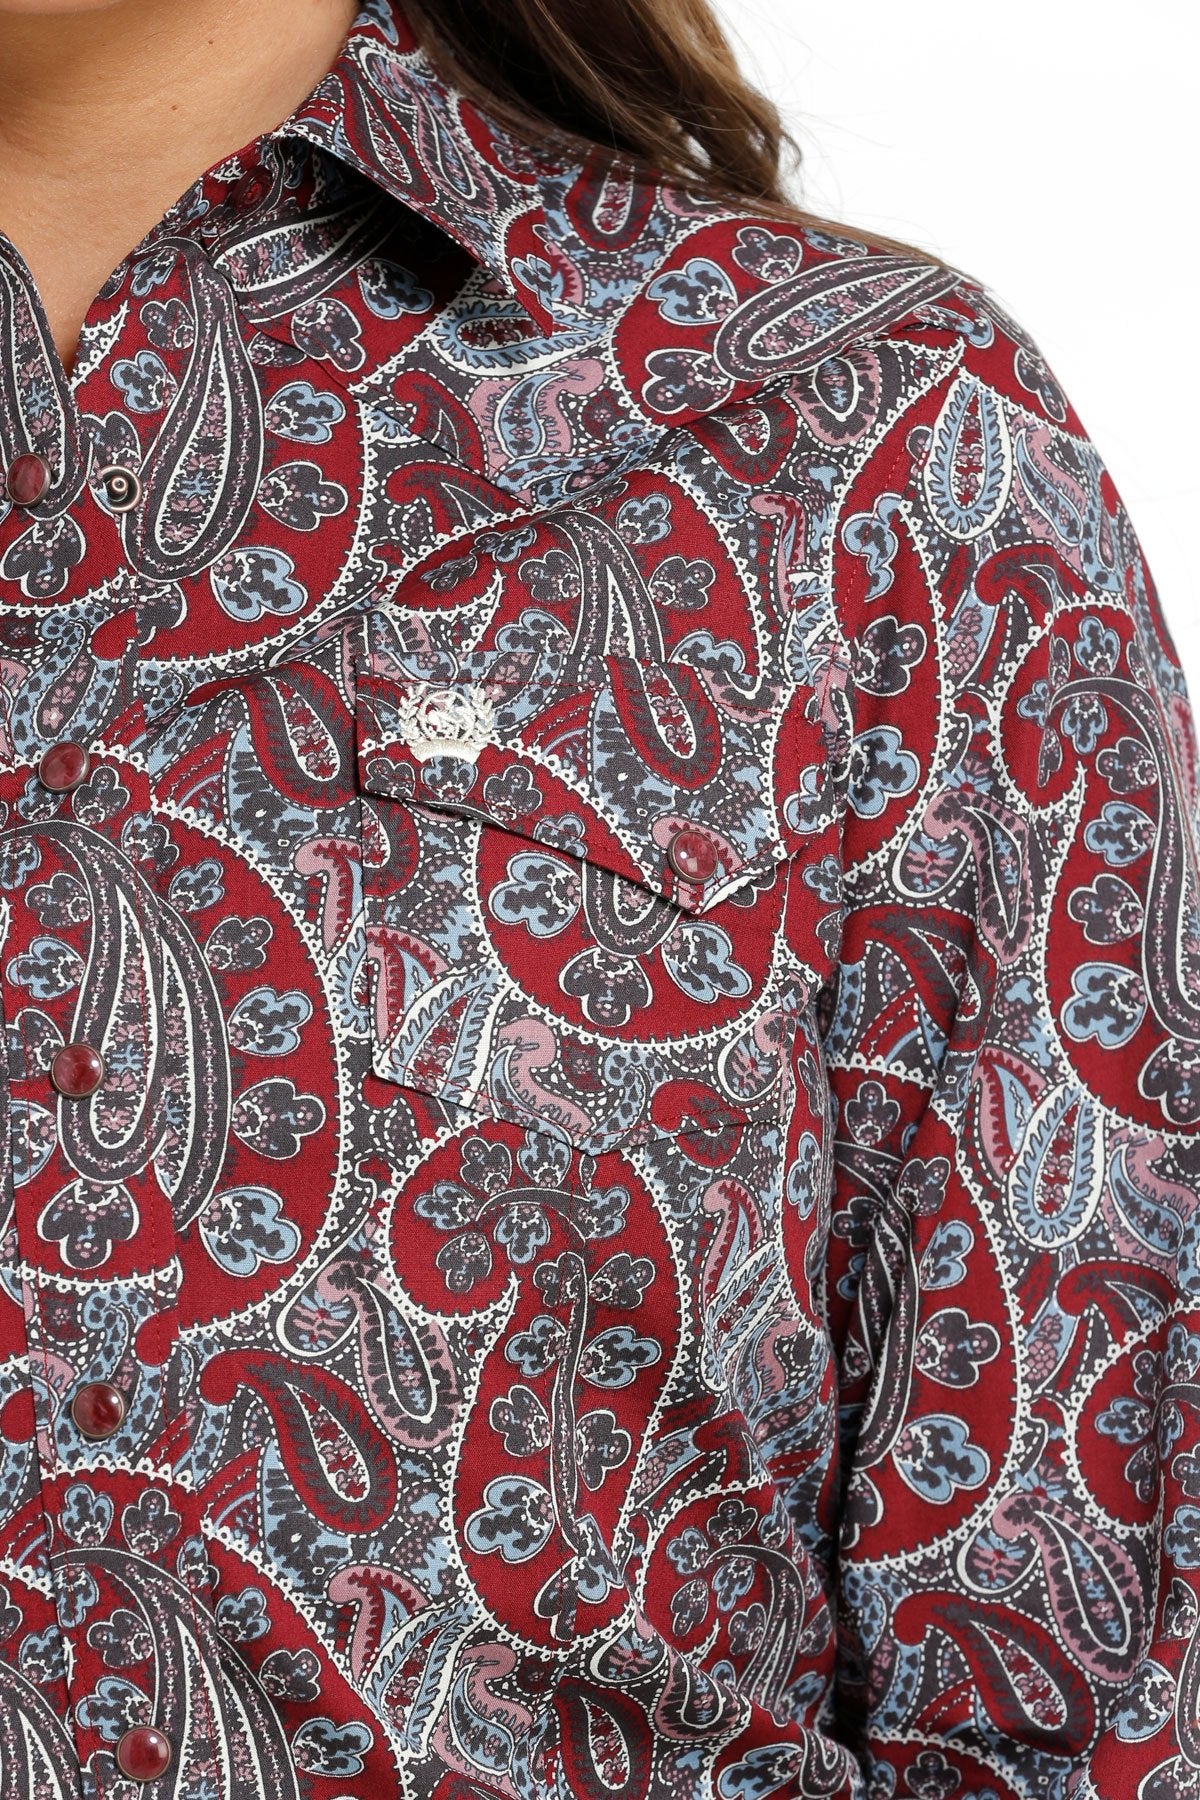 Cinch Women's Burgundy Paisley Printed Snap Front Western Shirt